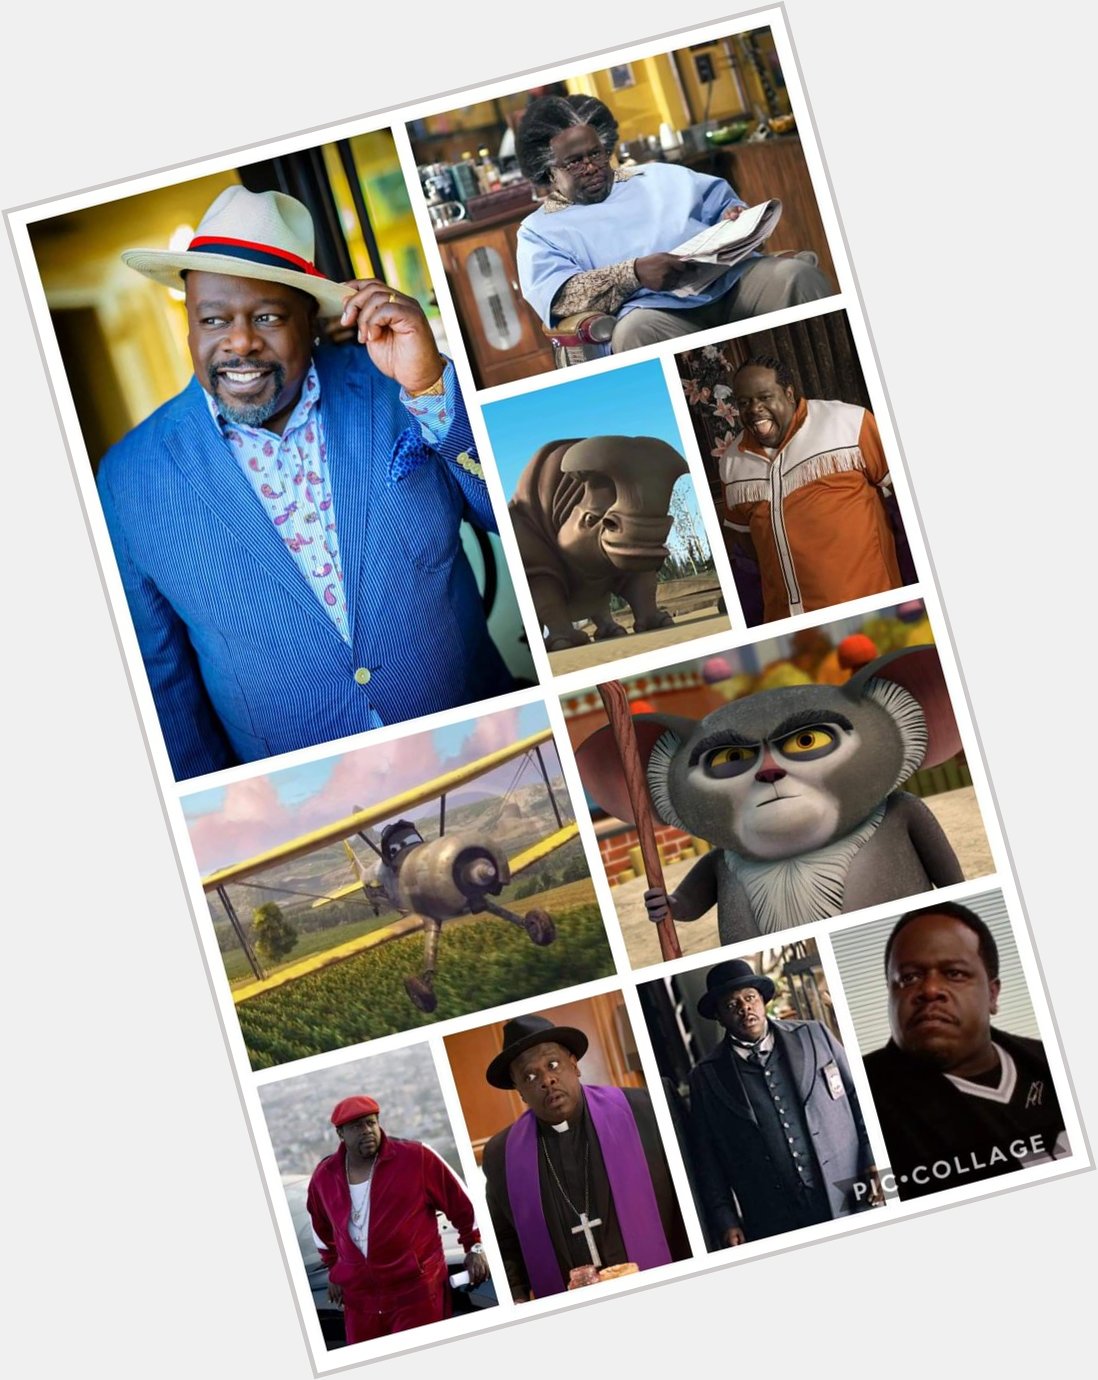 Happy Birthday to one of the original Kings of Comedy, Cedric the Entertainer. He is 5  9  today.   